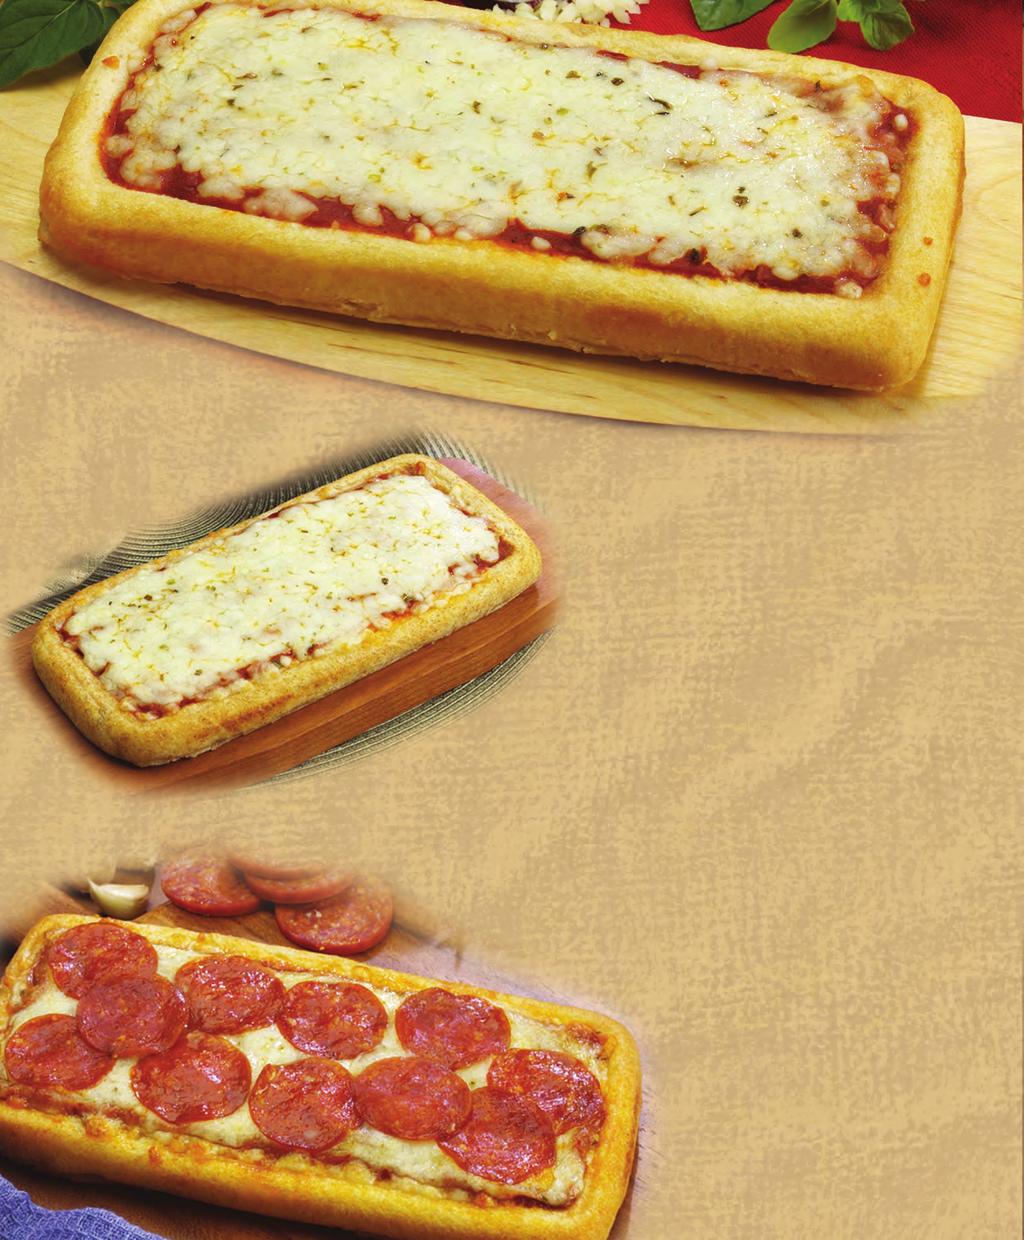 JOE JRS. Pizza Kits #200 Joe Jrs. Cheese Pizza Kit (Set de Pizza de Queso Joe Jrs. ) 8 personal sized pizzas topped with our special blend of 100% real cheese.